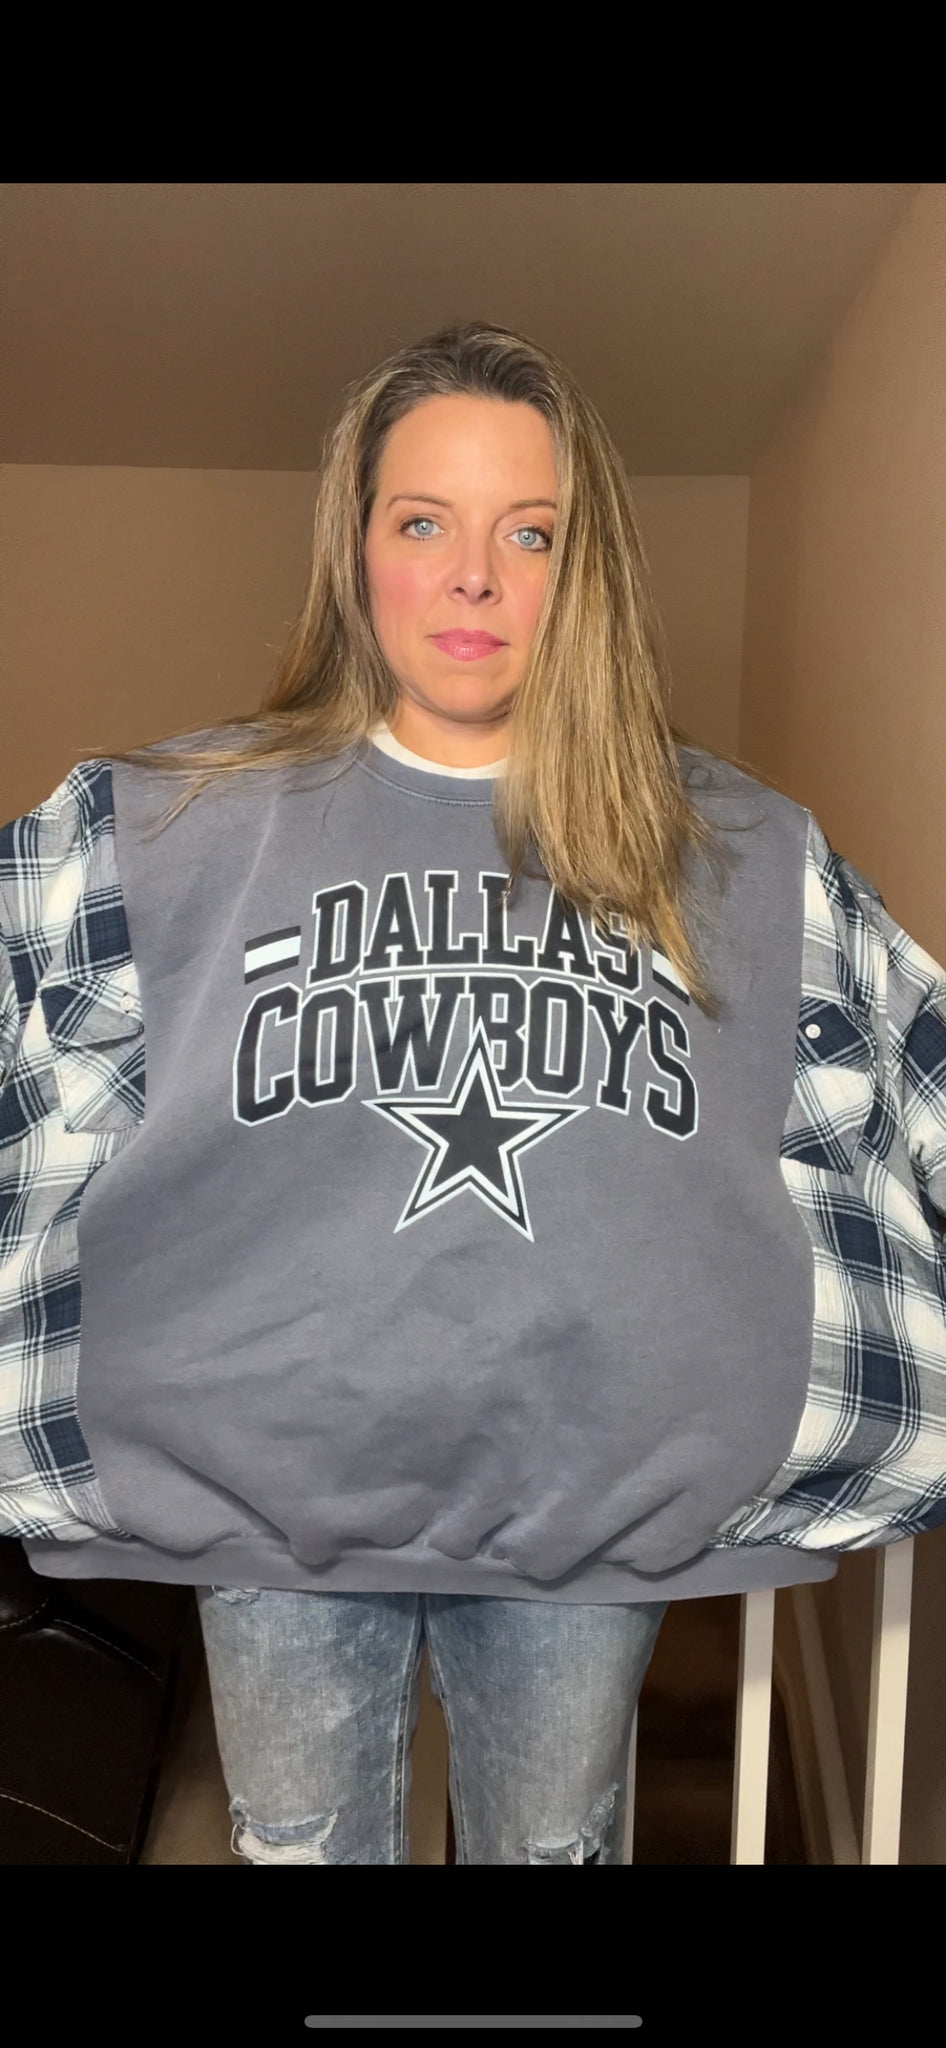 Cowboys - woman’s 3X - thick sweatshirt with soft cotton sleeves ￼